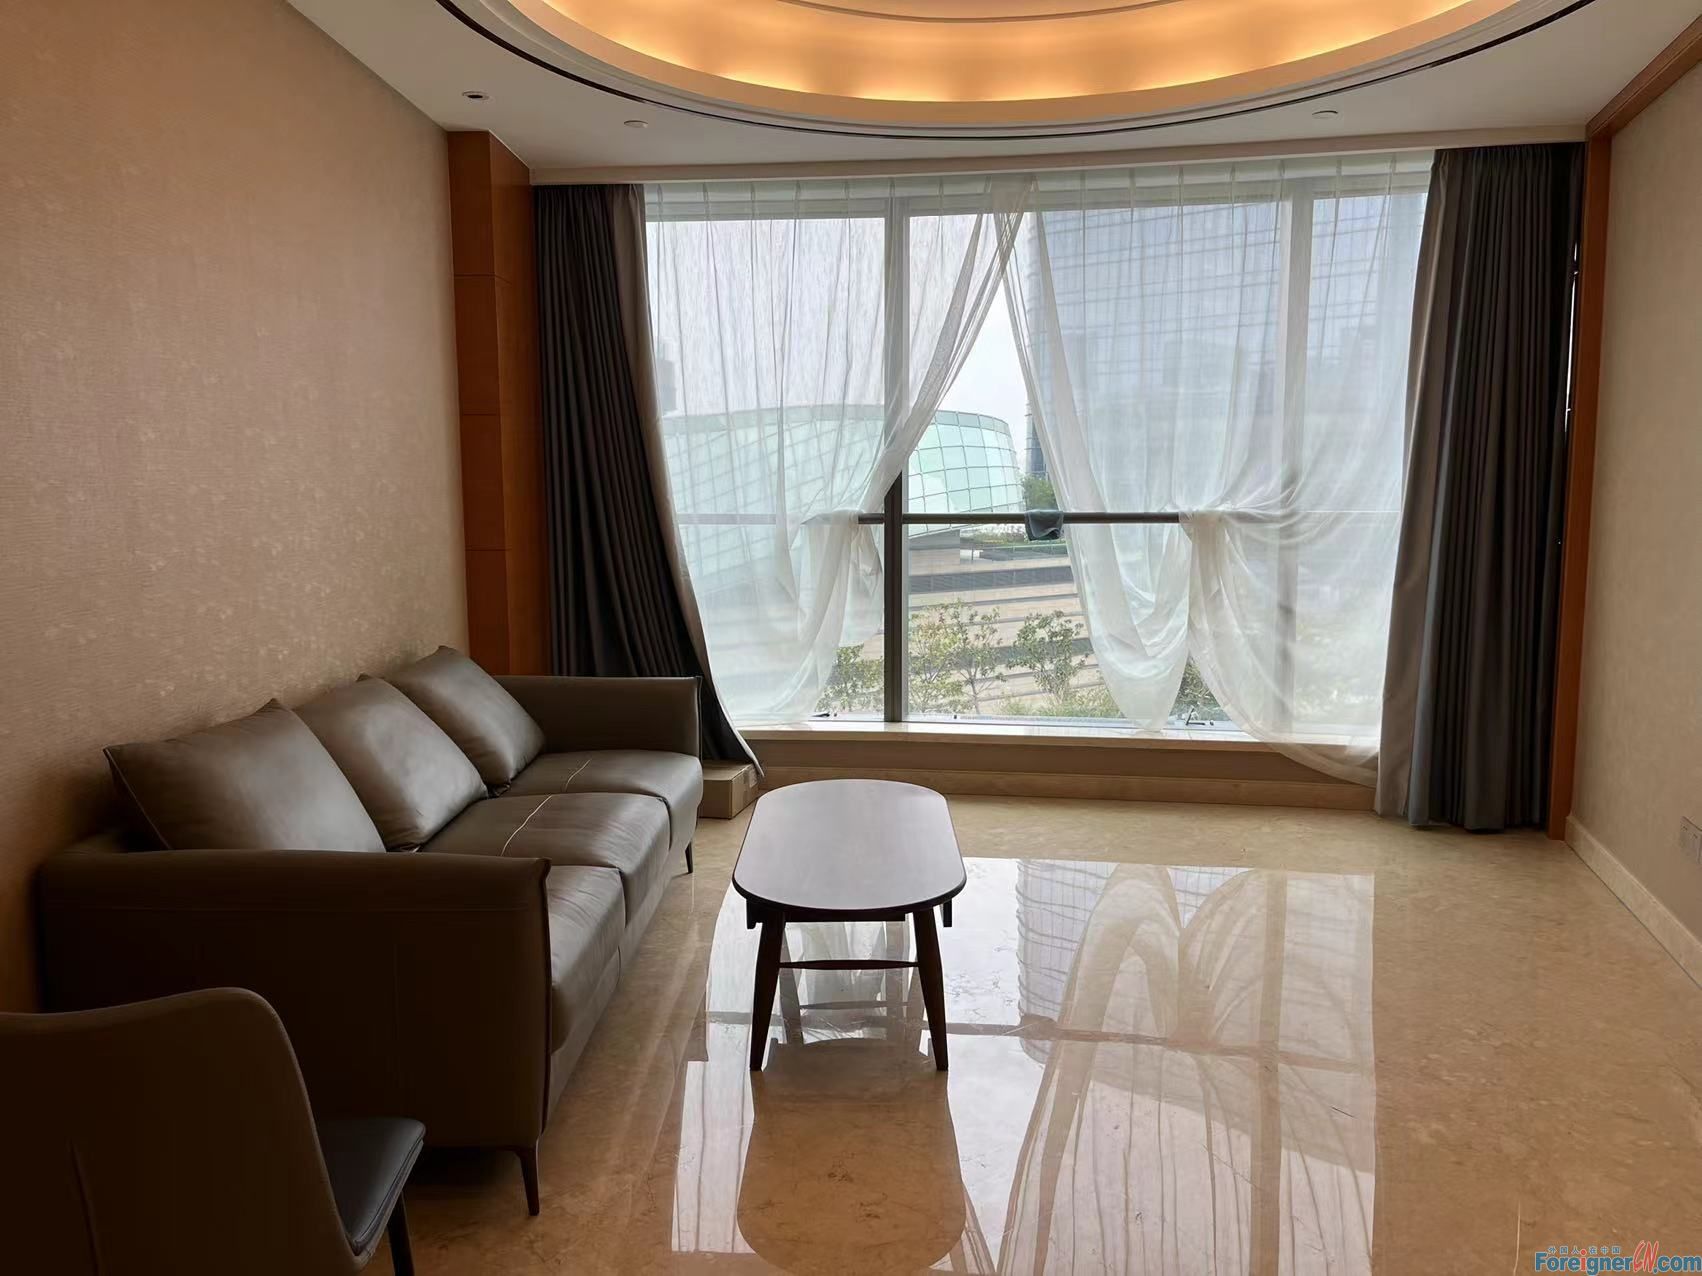 Stunning!!Suzhou Center No.9 apartment in SIP/2 bedrooms and 2 bathroom/Central AC、floor heating/close to Suzhou Center shopping mall/ Xinghai Square mall/Station nearby